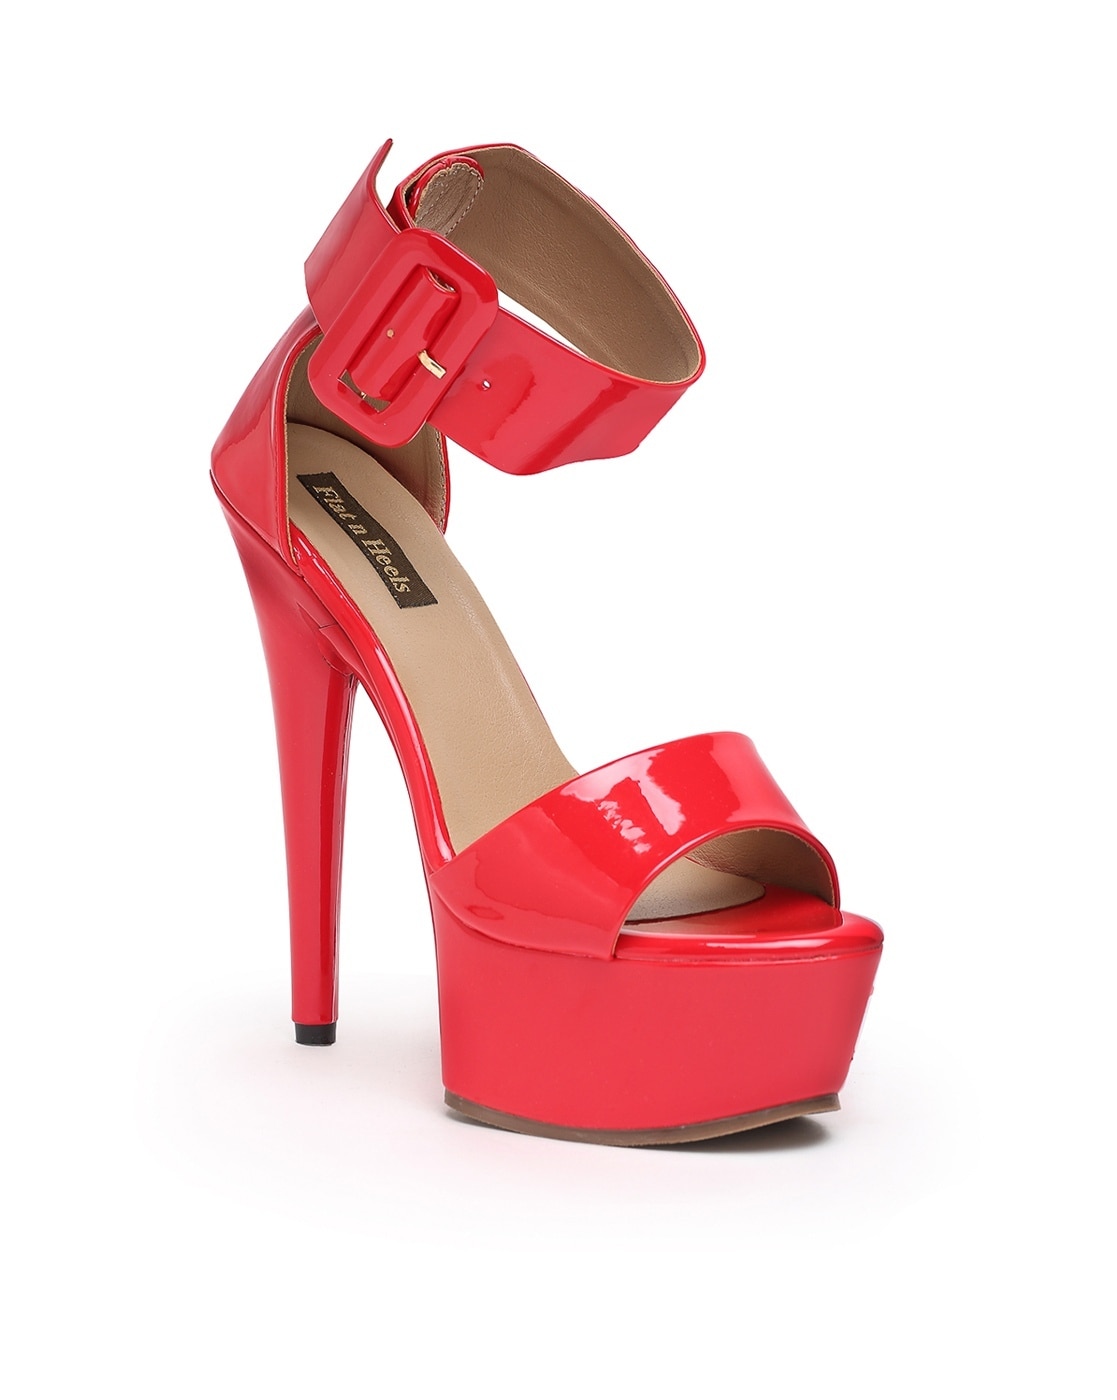 Red High Heels PNG Clipart - Best WEB Clipart